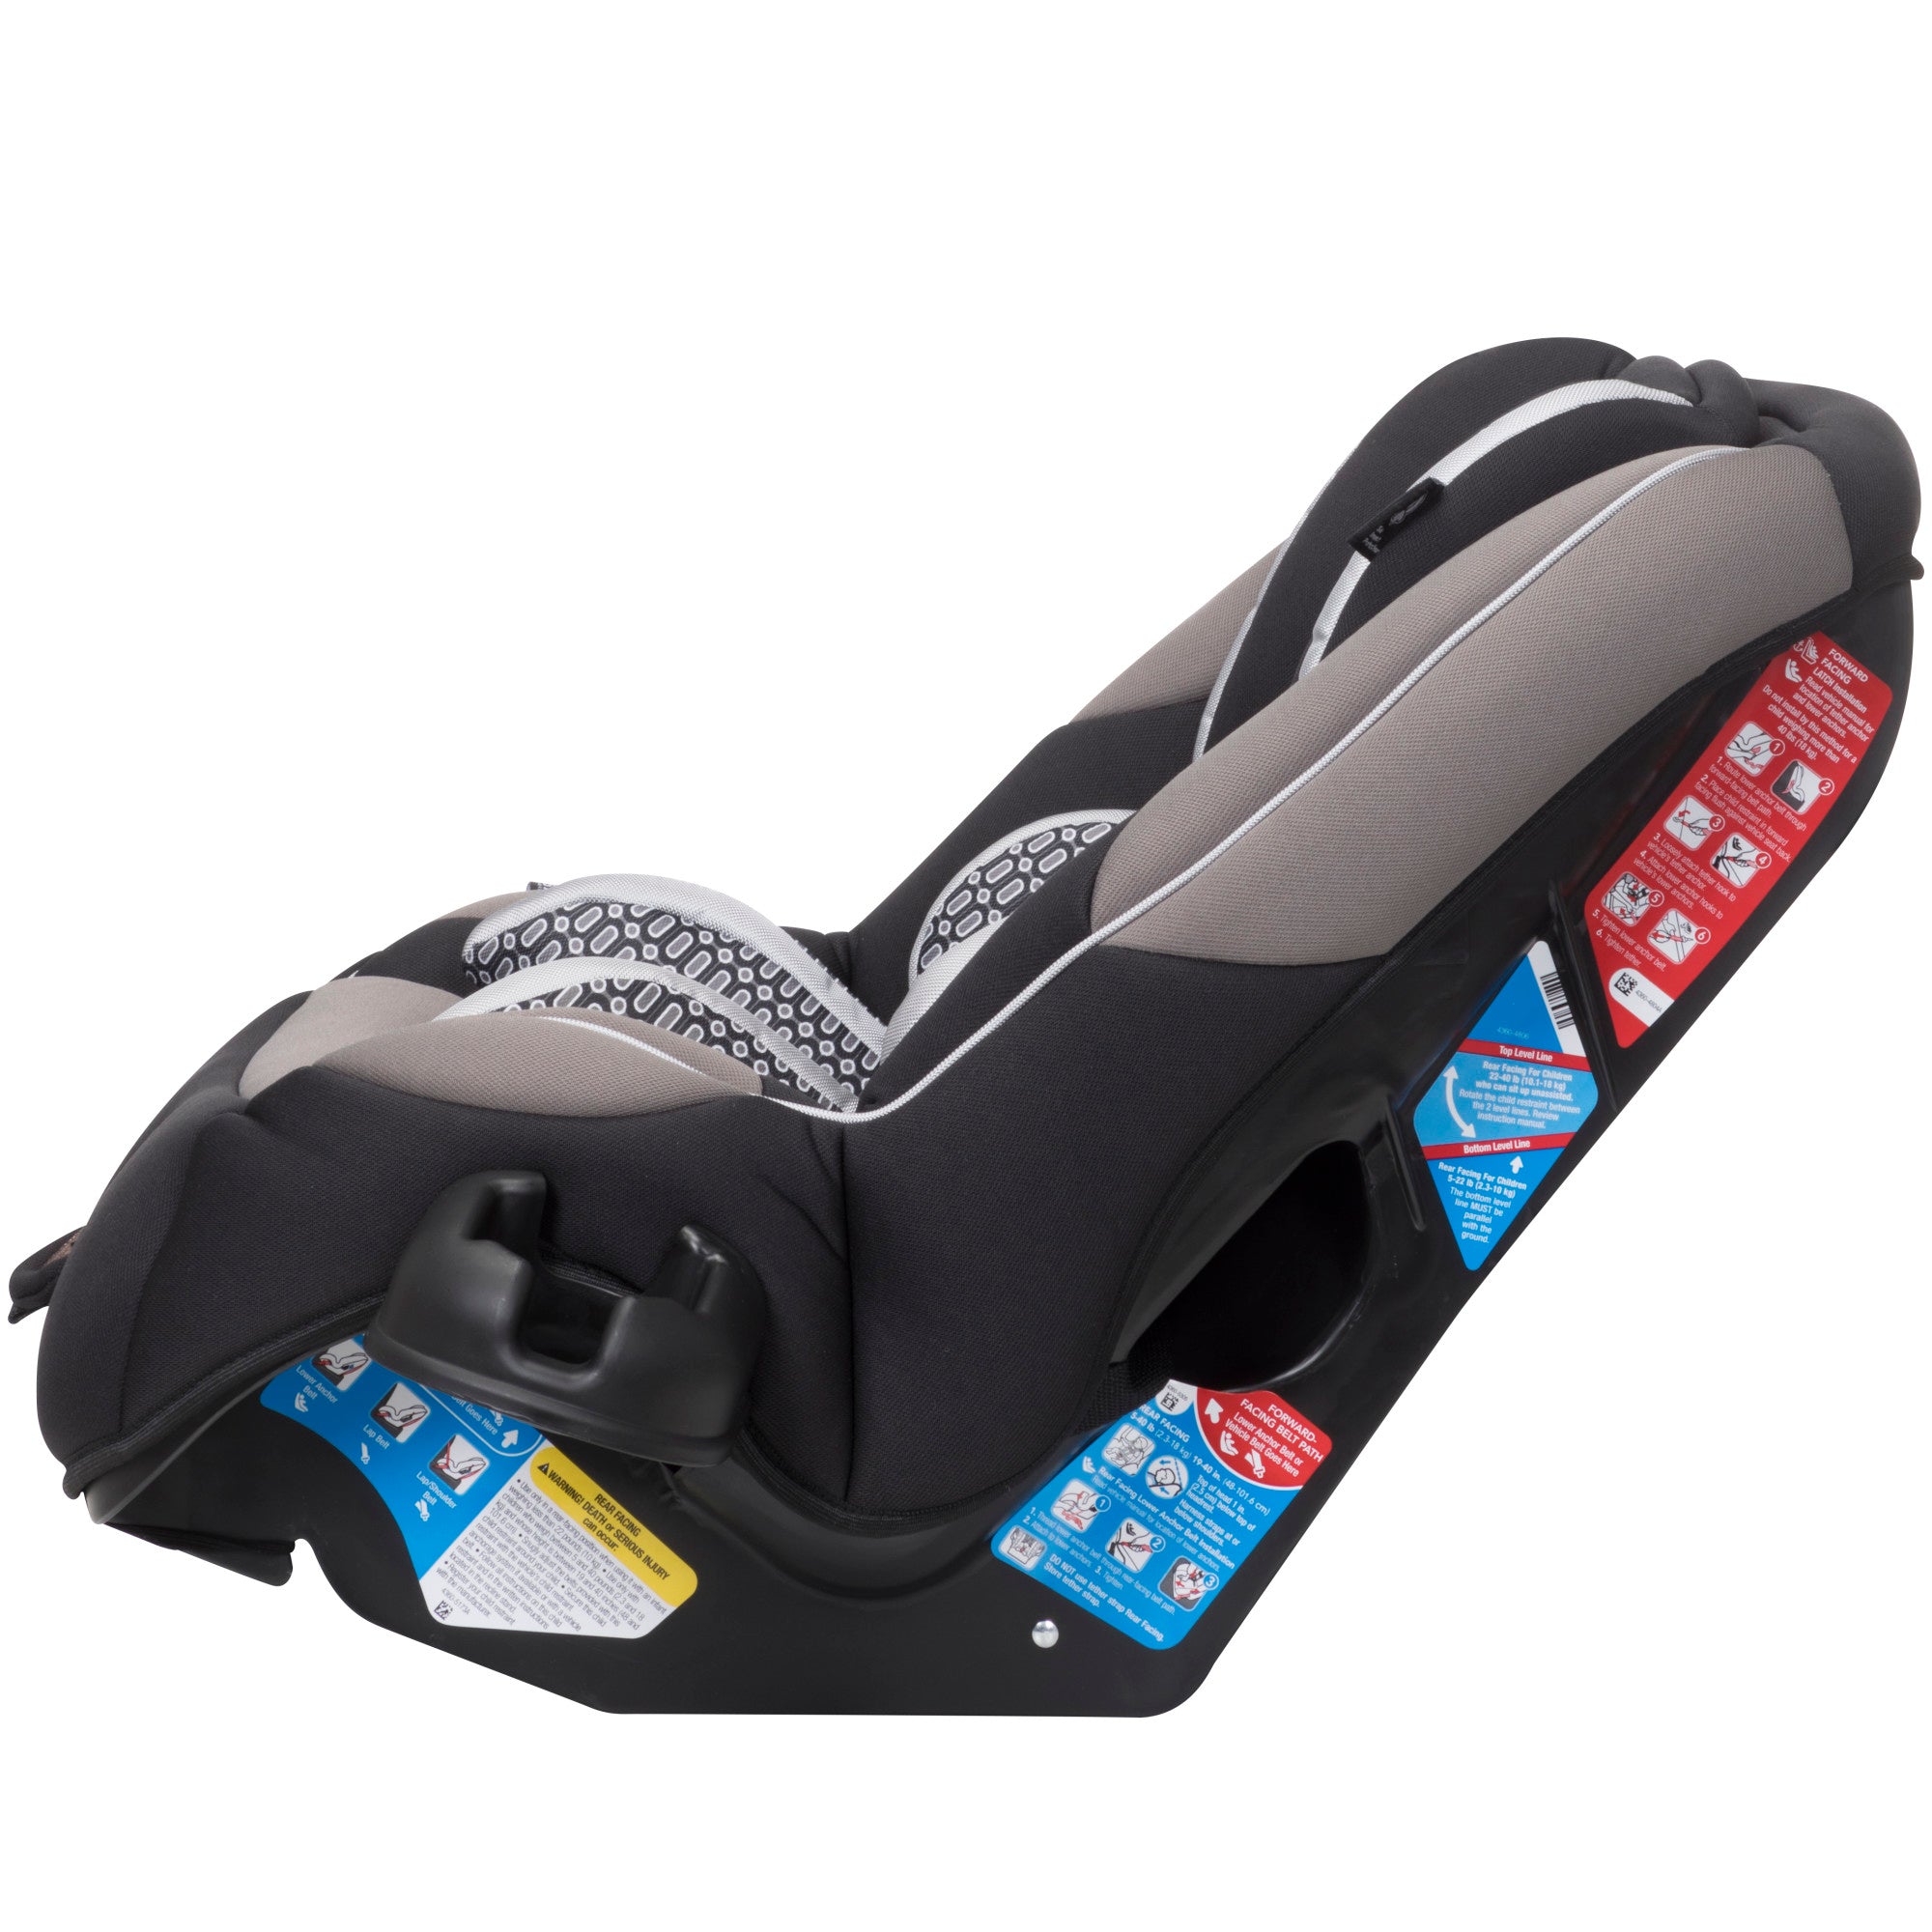 Safety 1st Guide 65 Convertible Car Seat in Chambers